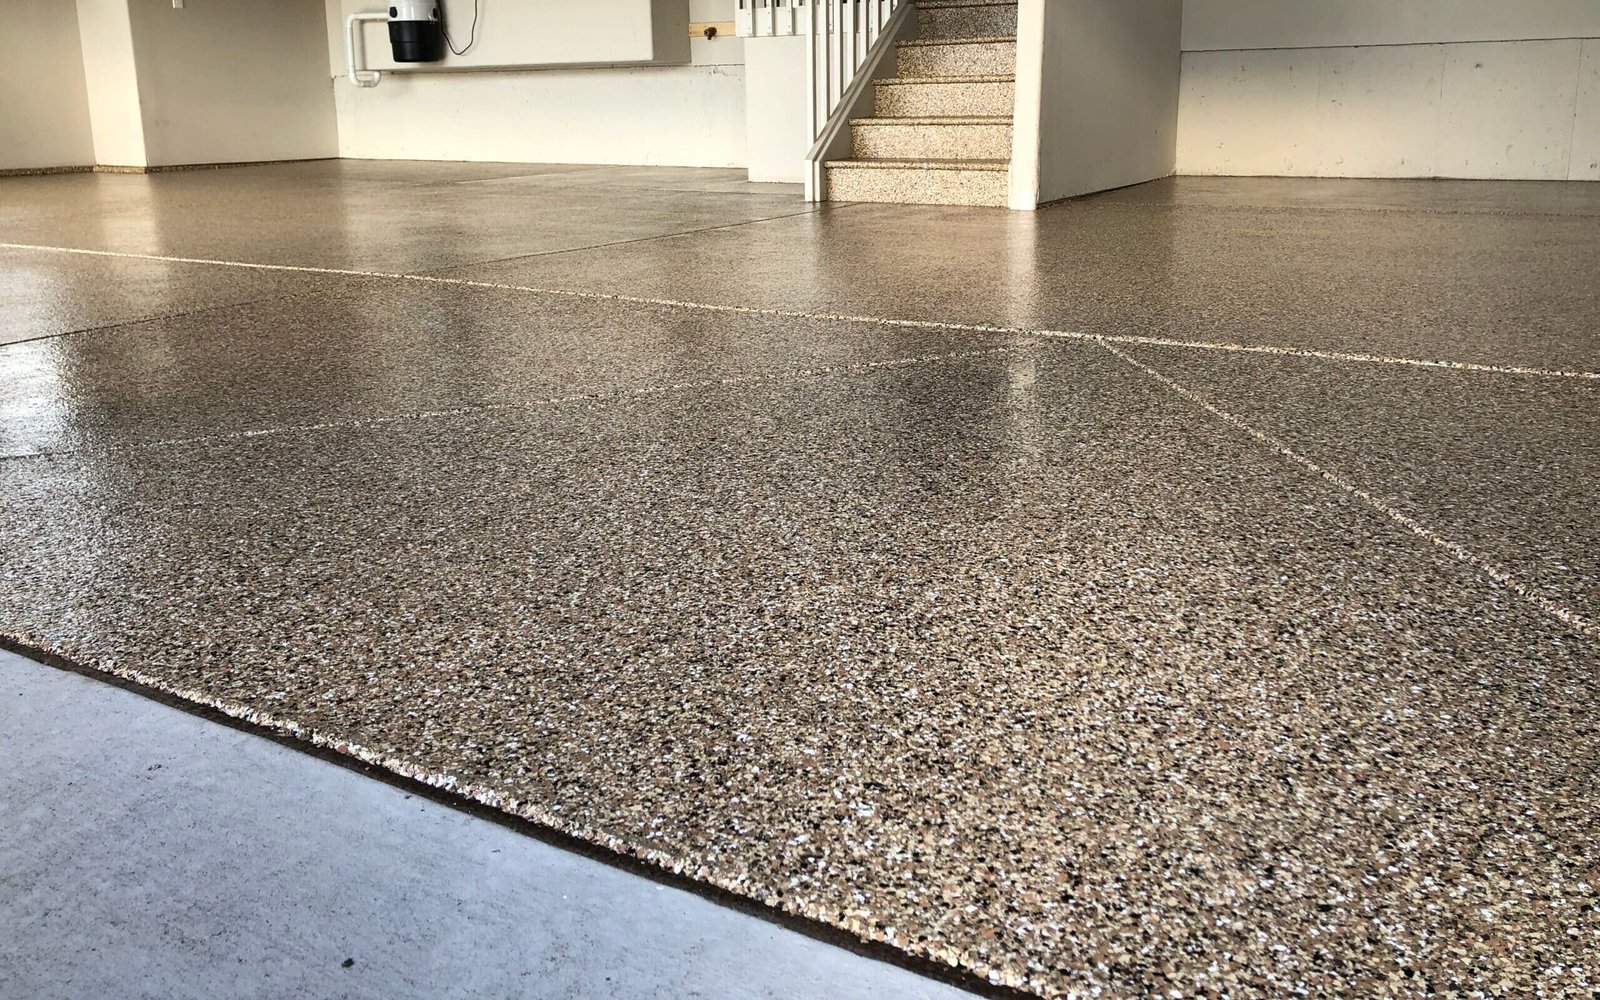 What is the benefit of a coated garage floor?